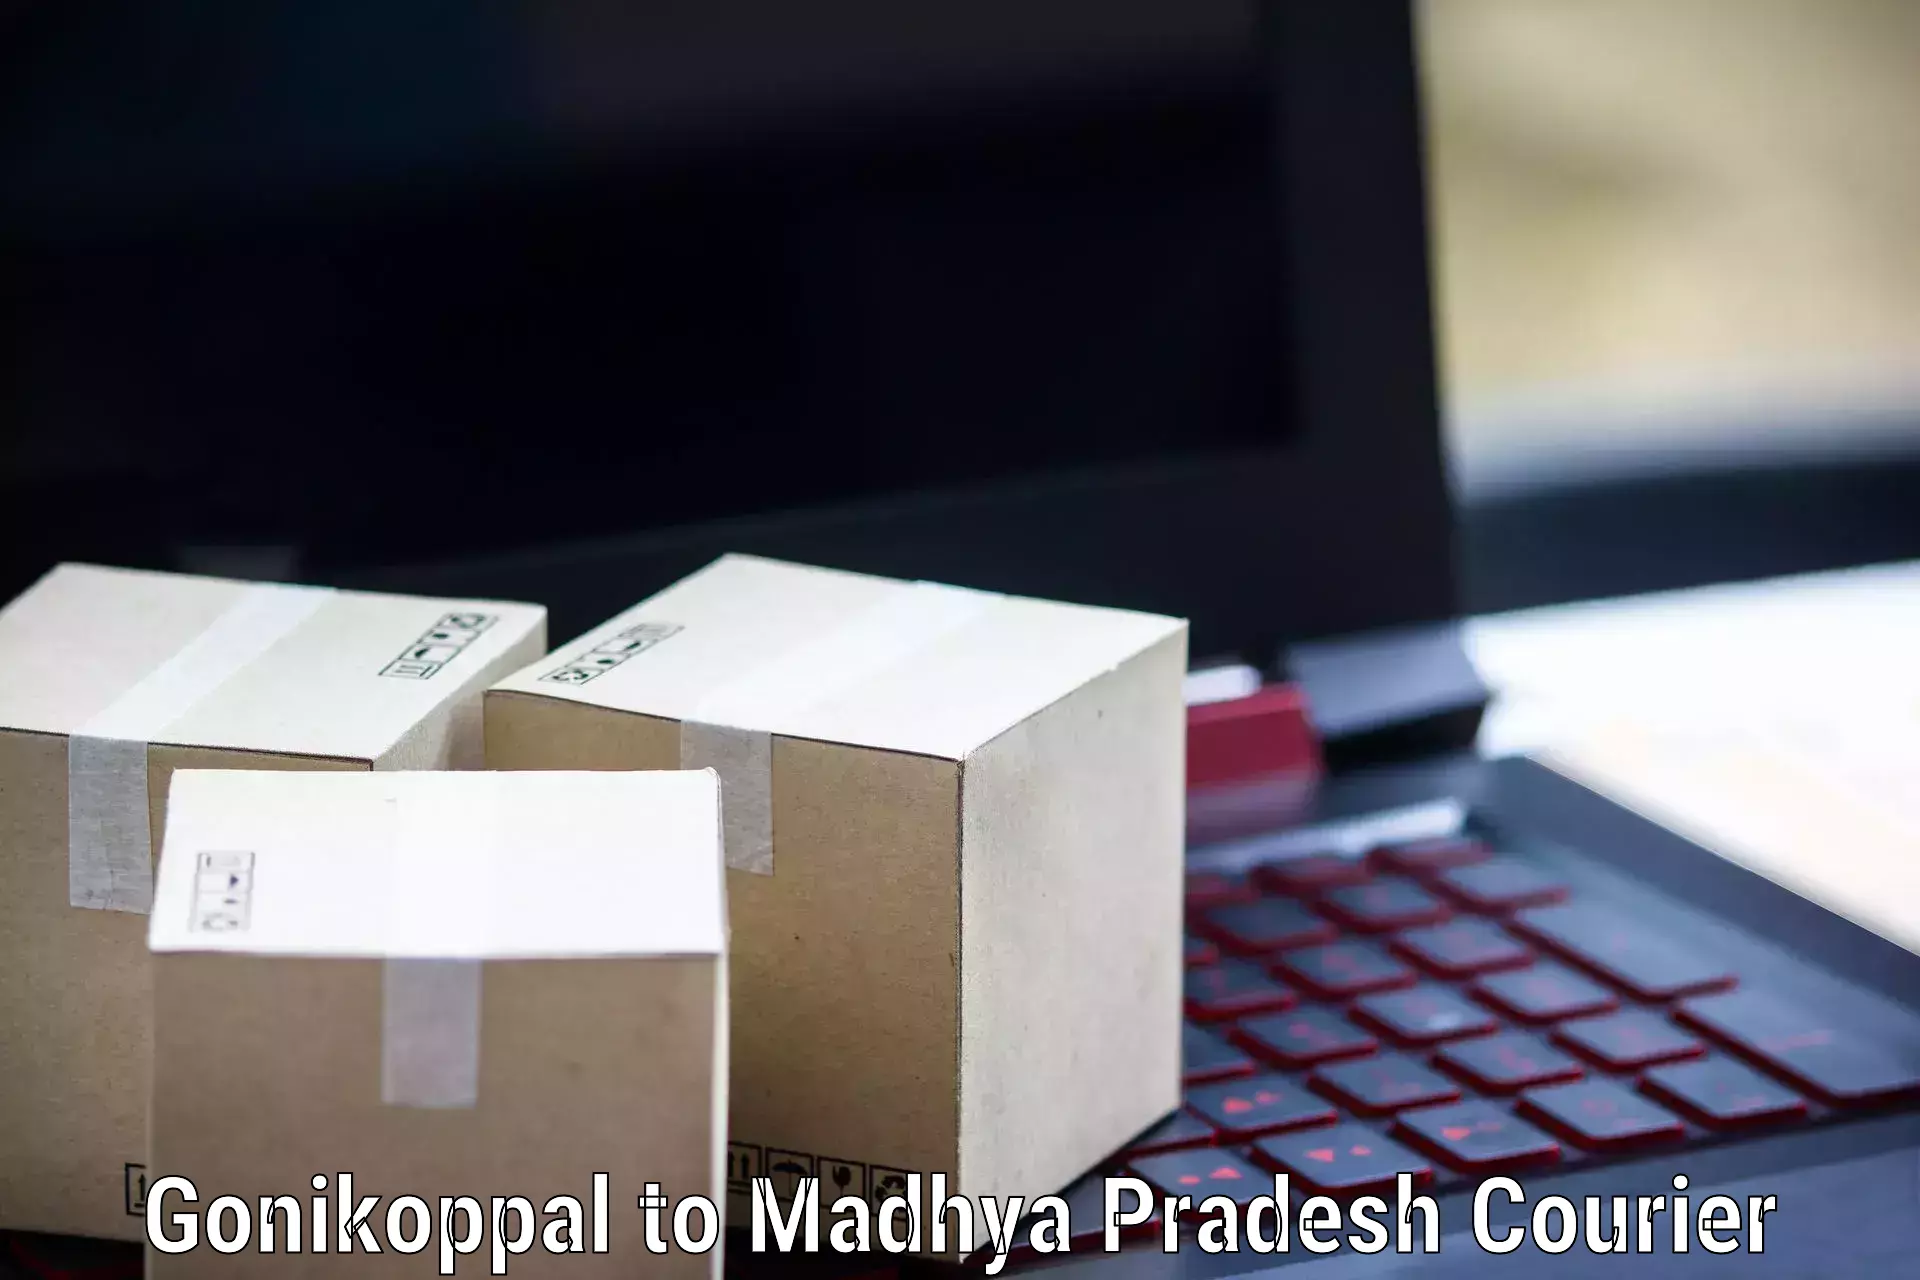 Sustainable courier practices Gonikoppal to Mandideep